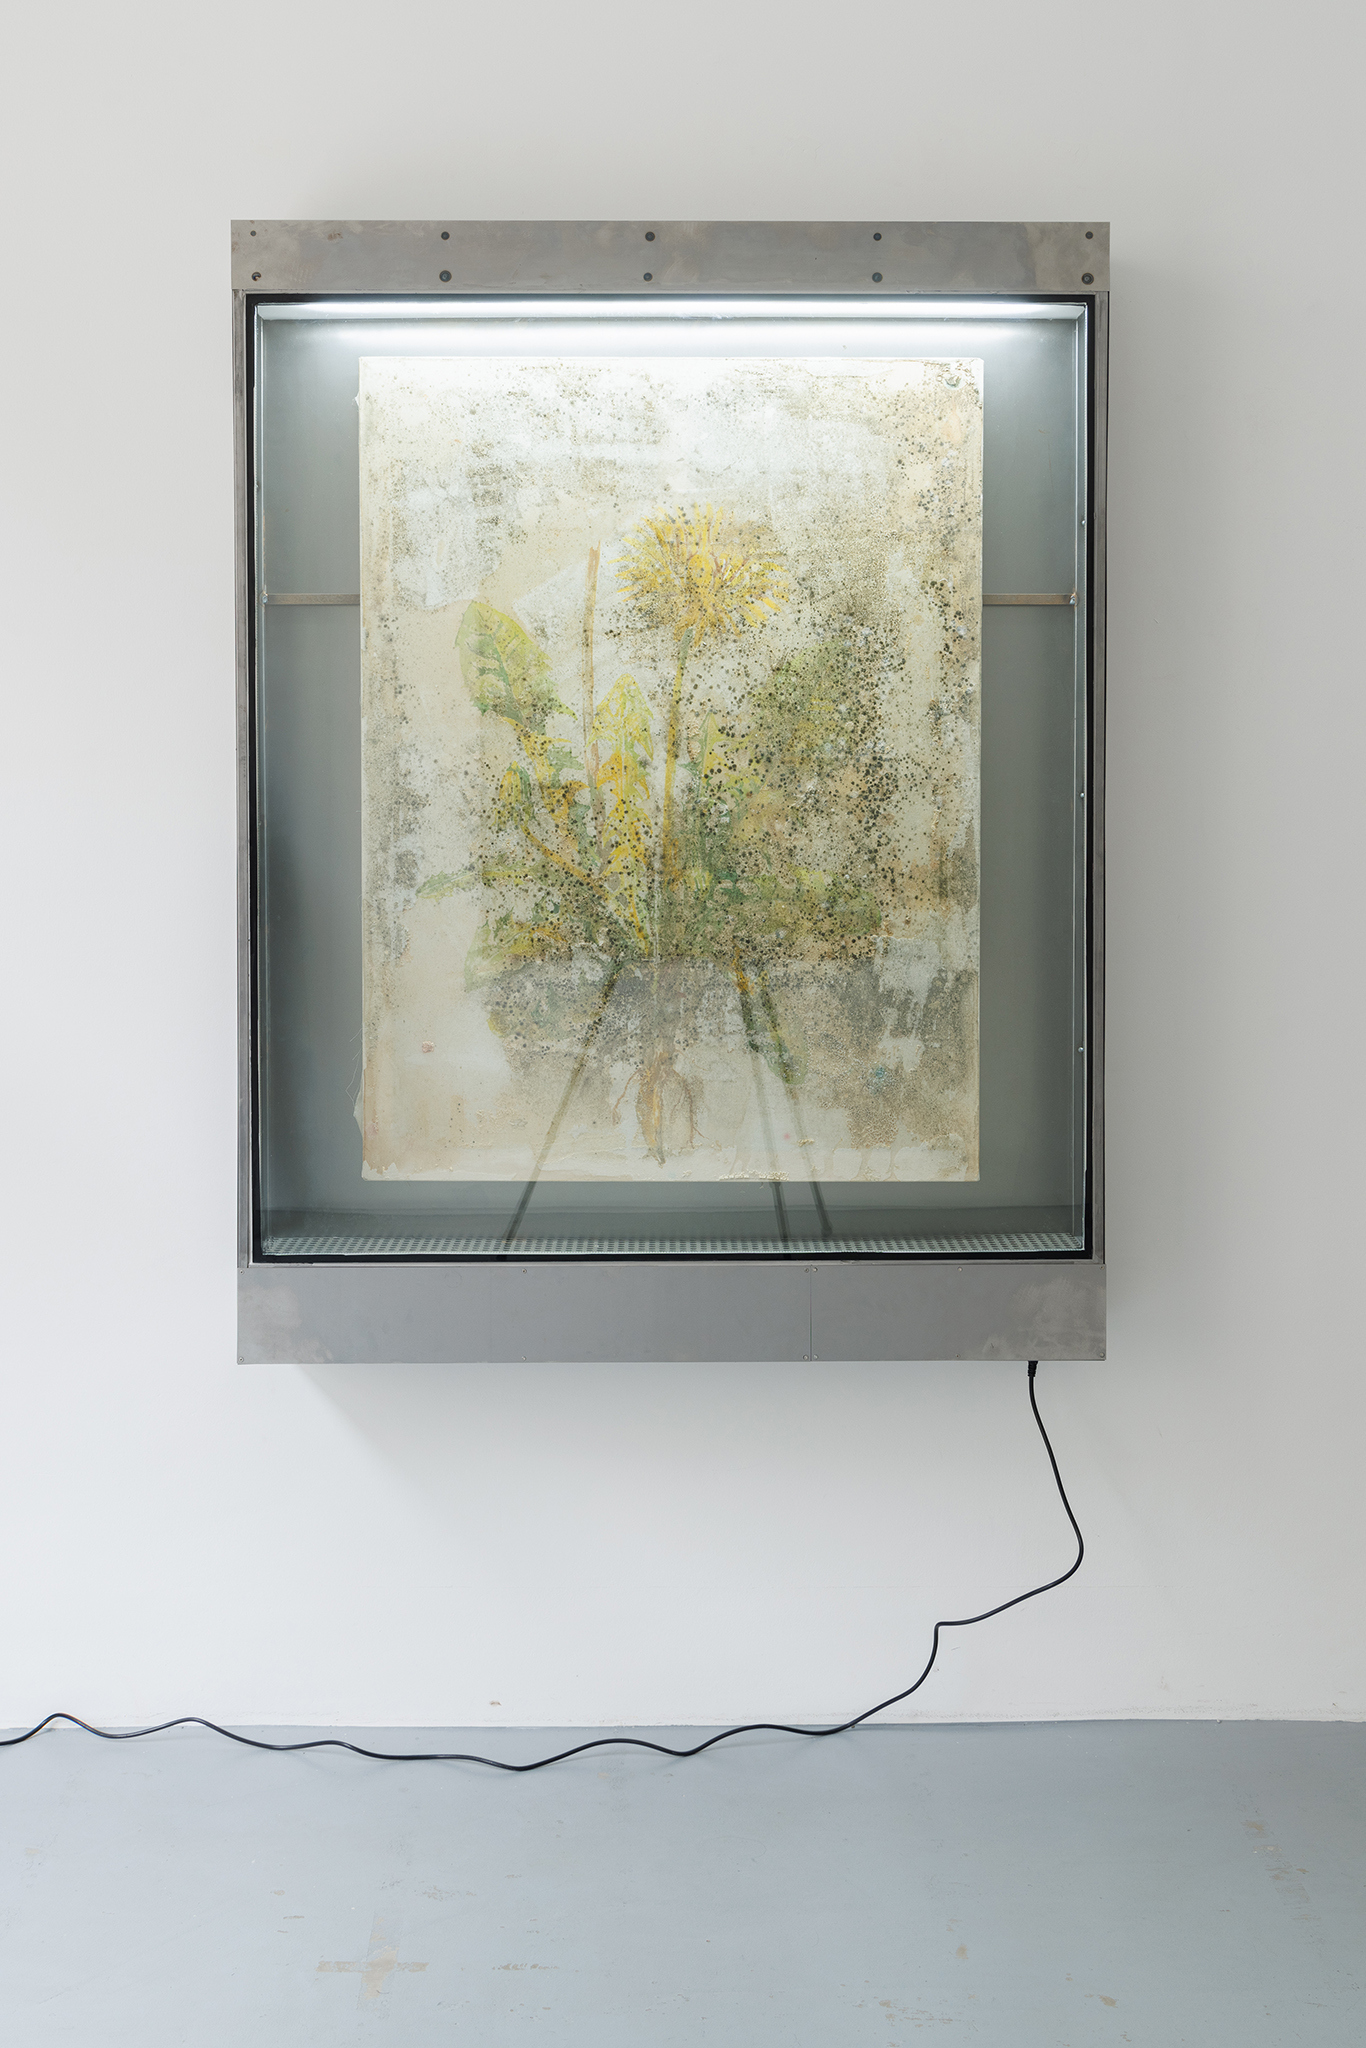 Vincent Scheers, Incubator study II, 2023, steel, glass, hacked egg incubator, watercolour on nettle cloth, agar-agar, various fungi and bacteria, 160 x 122 x 20 cm